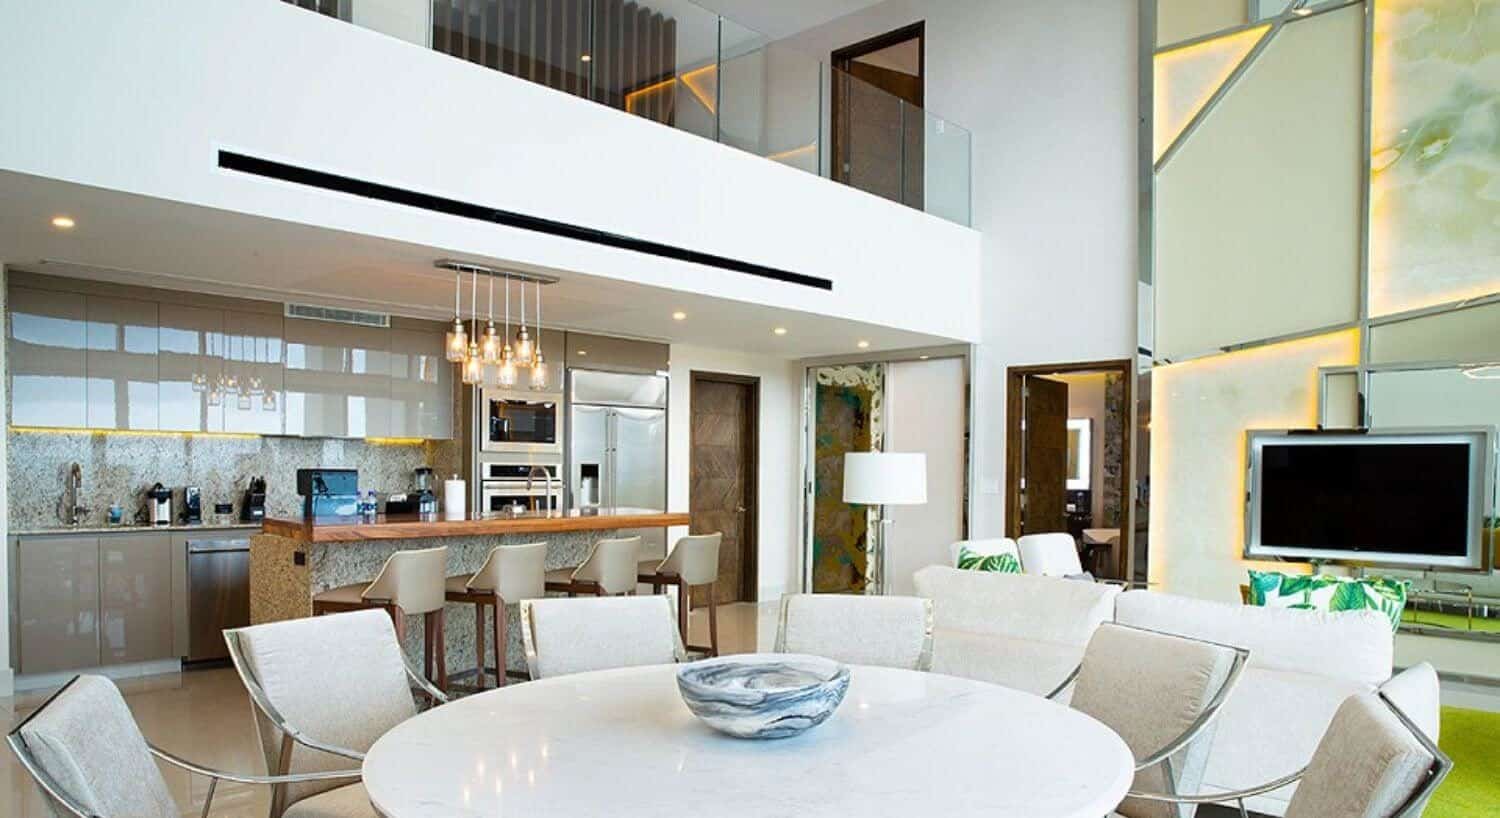 A multi story room with a dining area with white table and chairs, a living area with white sofa and chairs, a large flat screen TV, a gourmet kitchen with stainless steel appliances, breakfast bar with four bar stools, a door leaving to a bedroom, and a second floor with a door leading to another bedroom and hallway leading to other bedrooms.